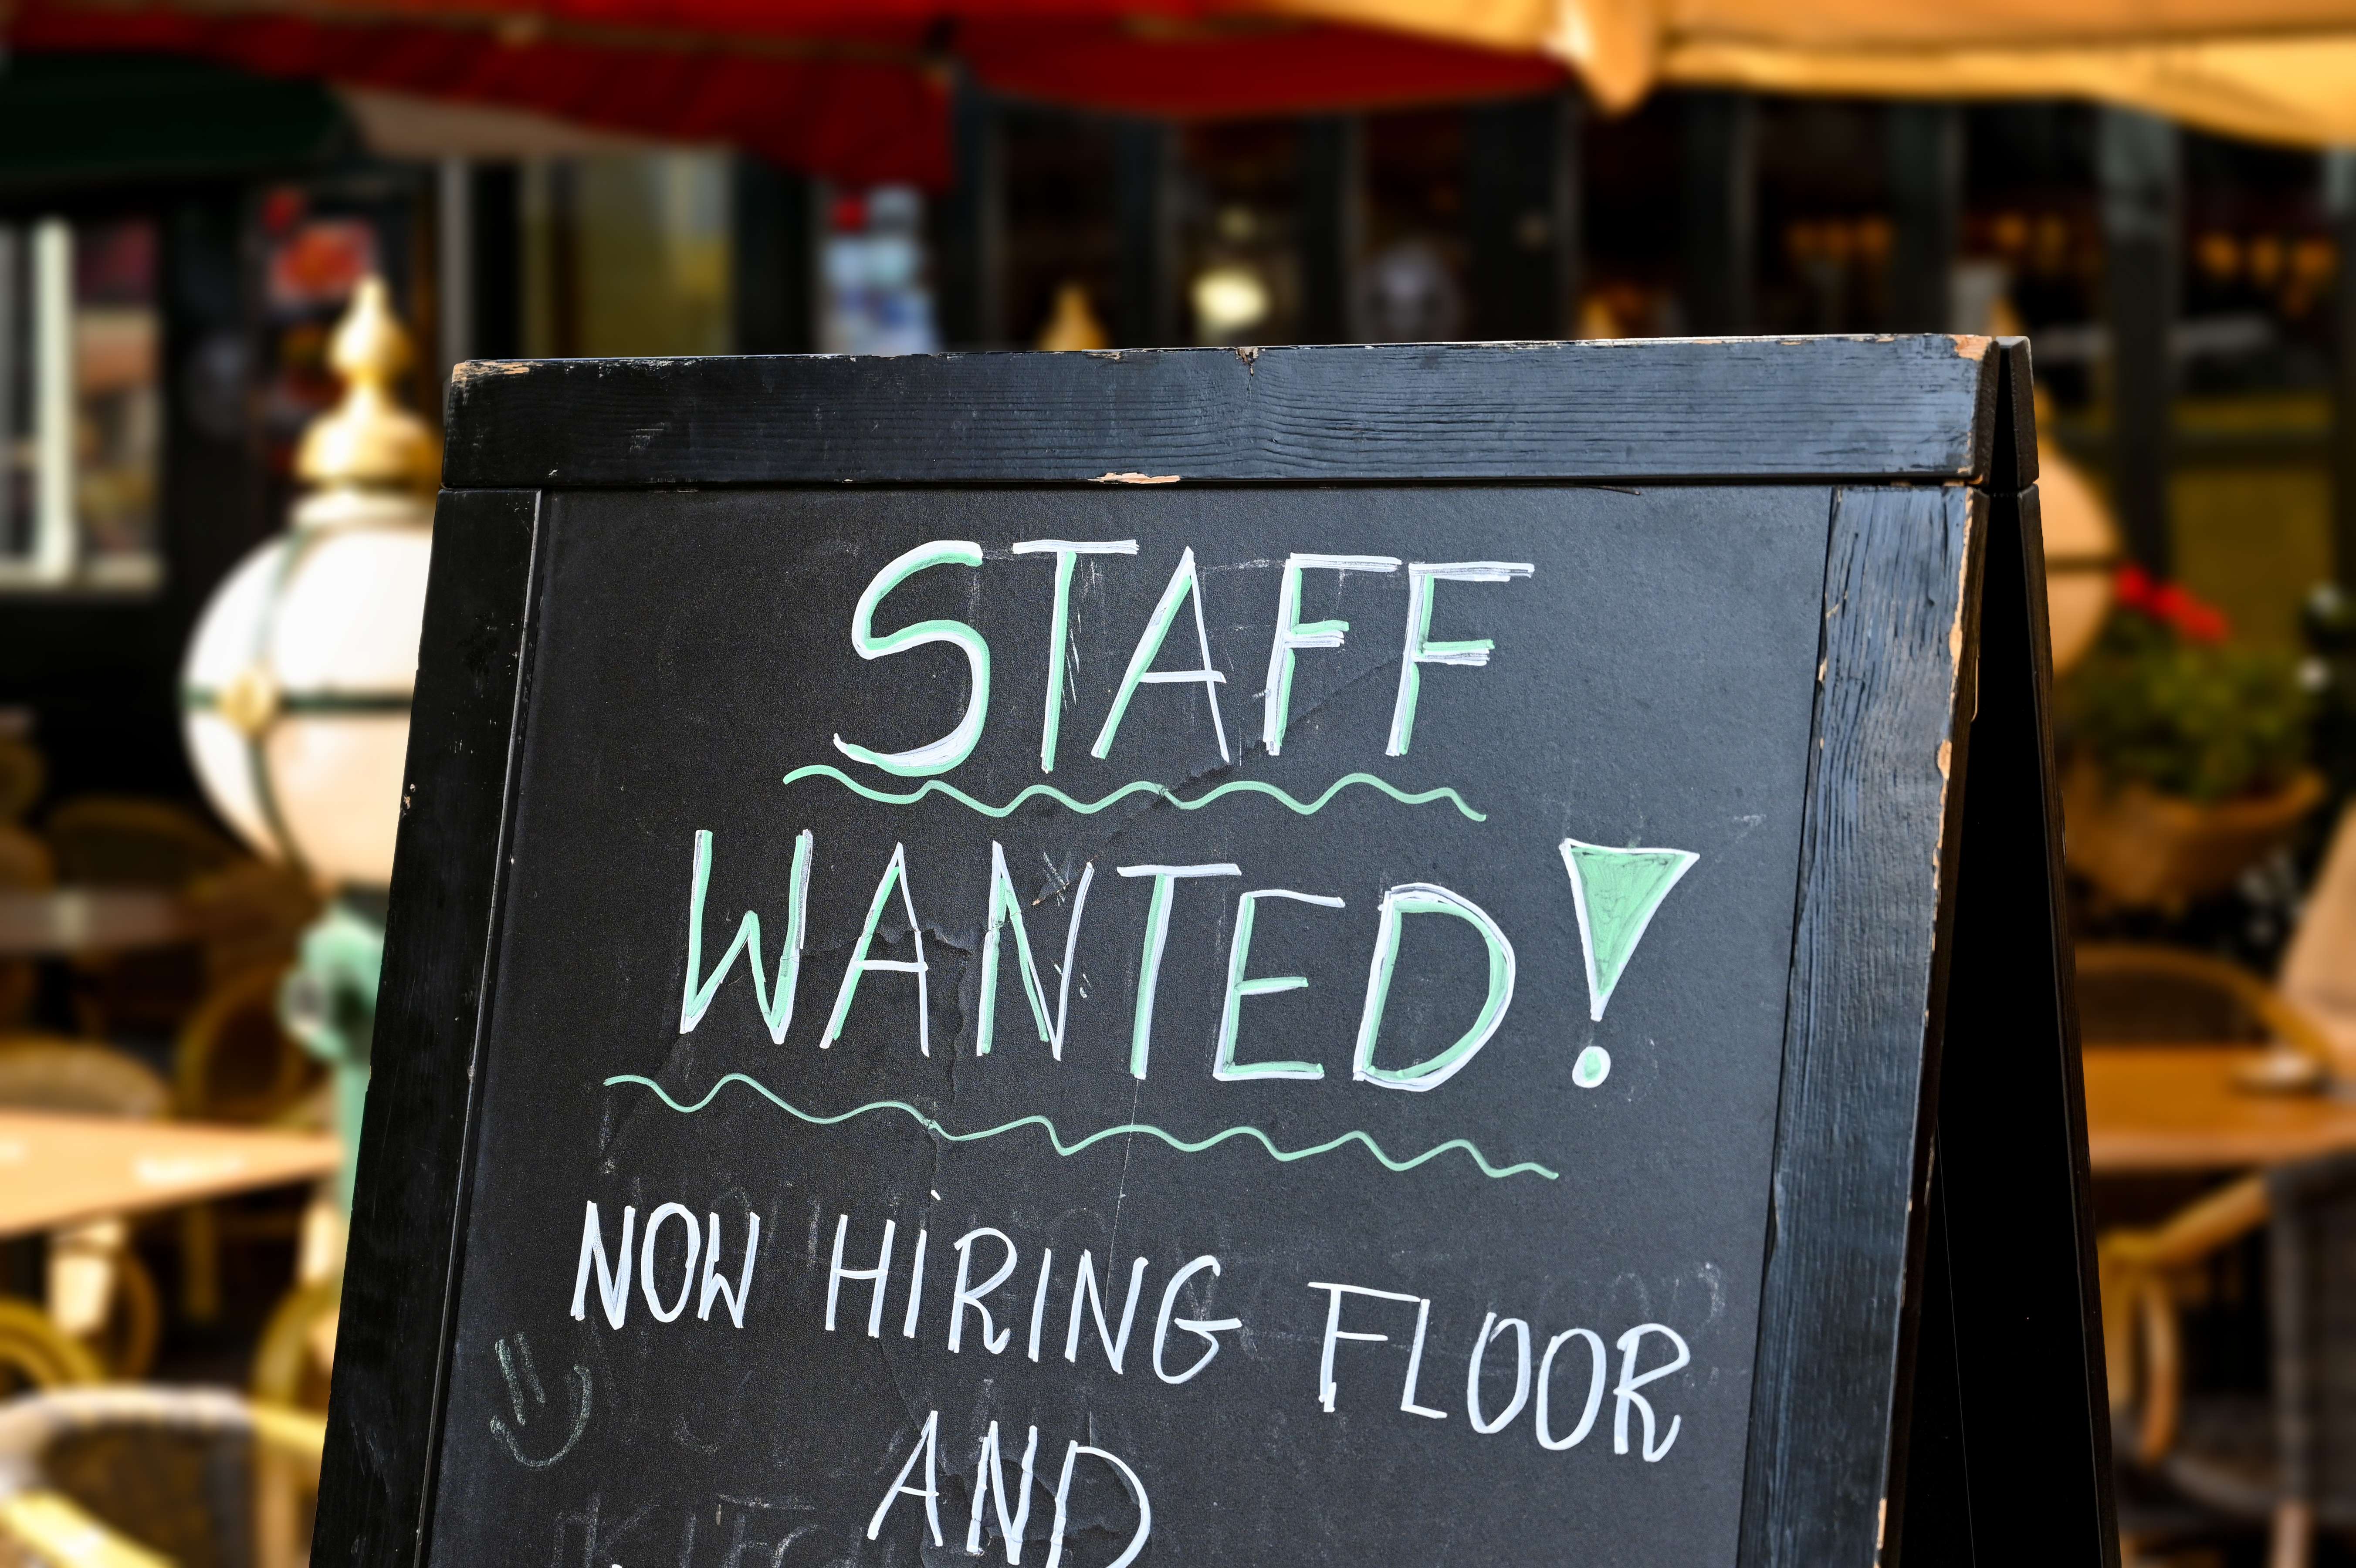 Jobless rate in London region unchanged – London News Today